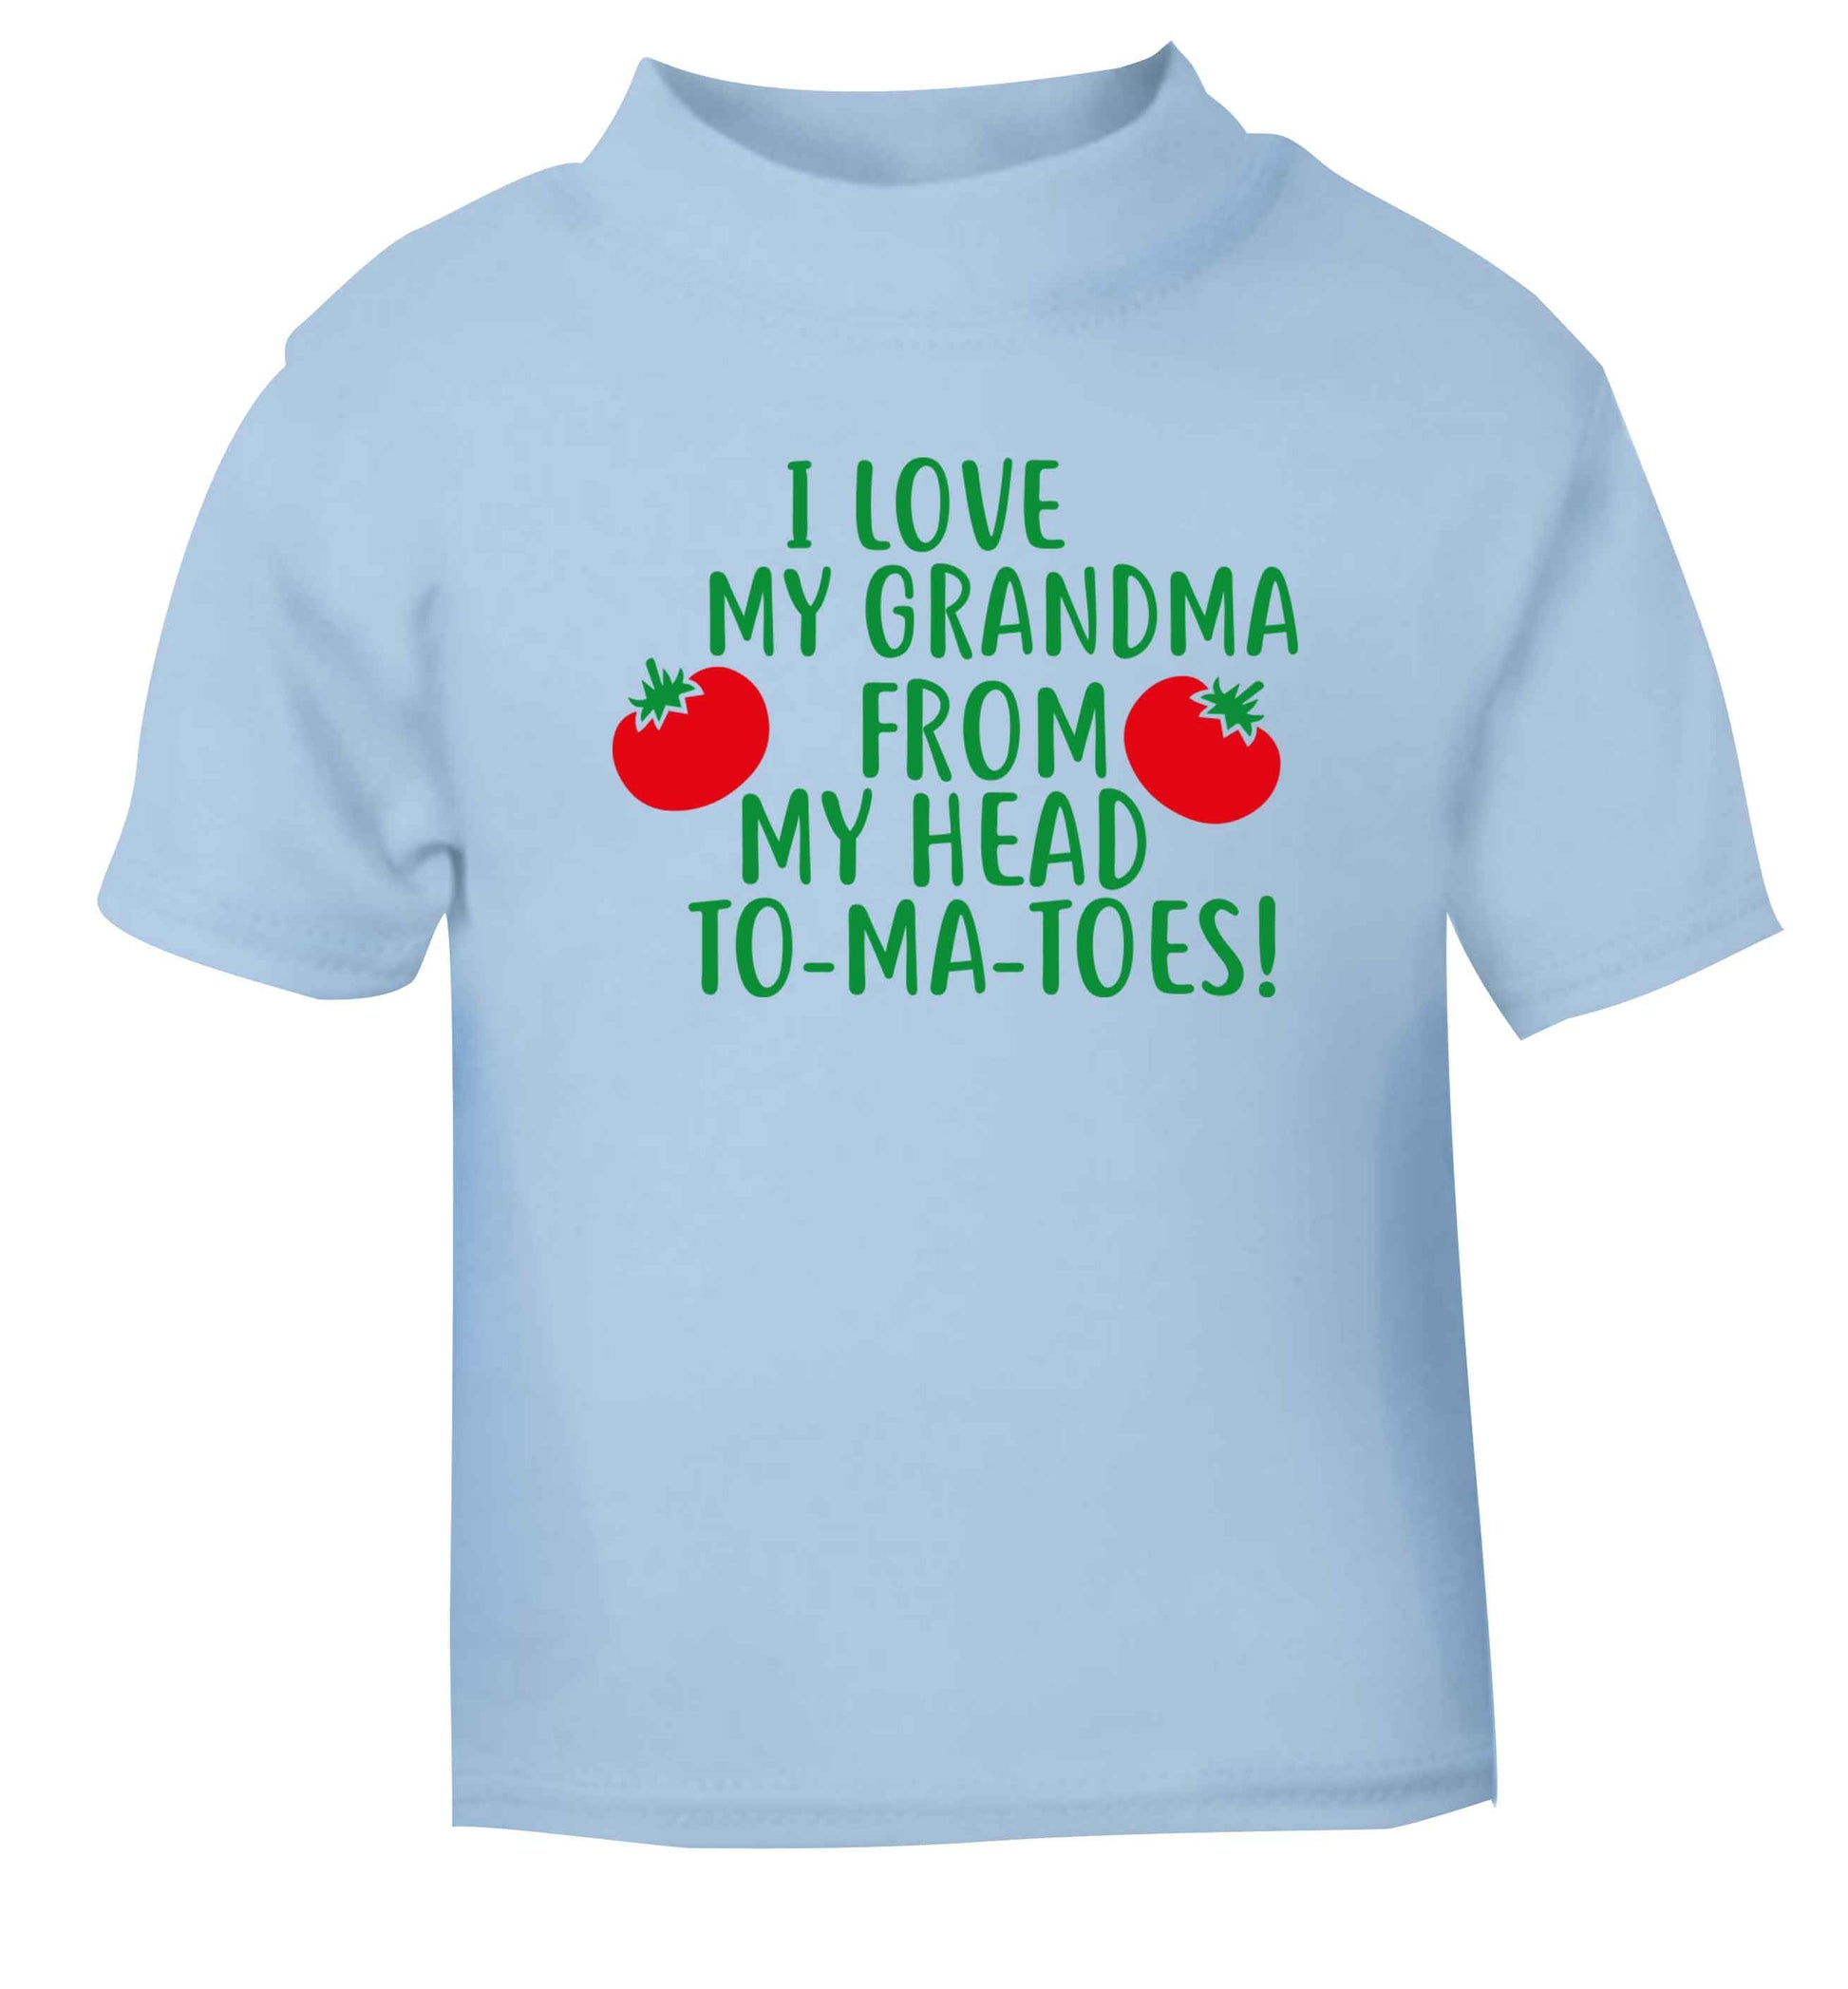 I love my grandma from my head to-ma-toes light blue Baby Toddler Tshirt 2 Years